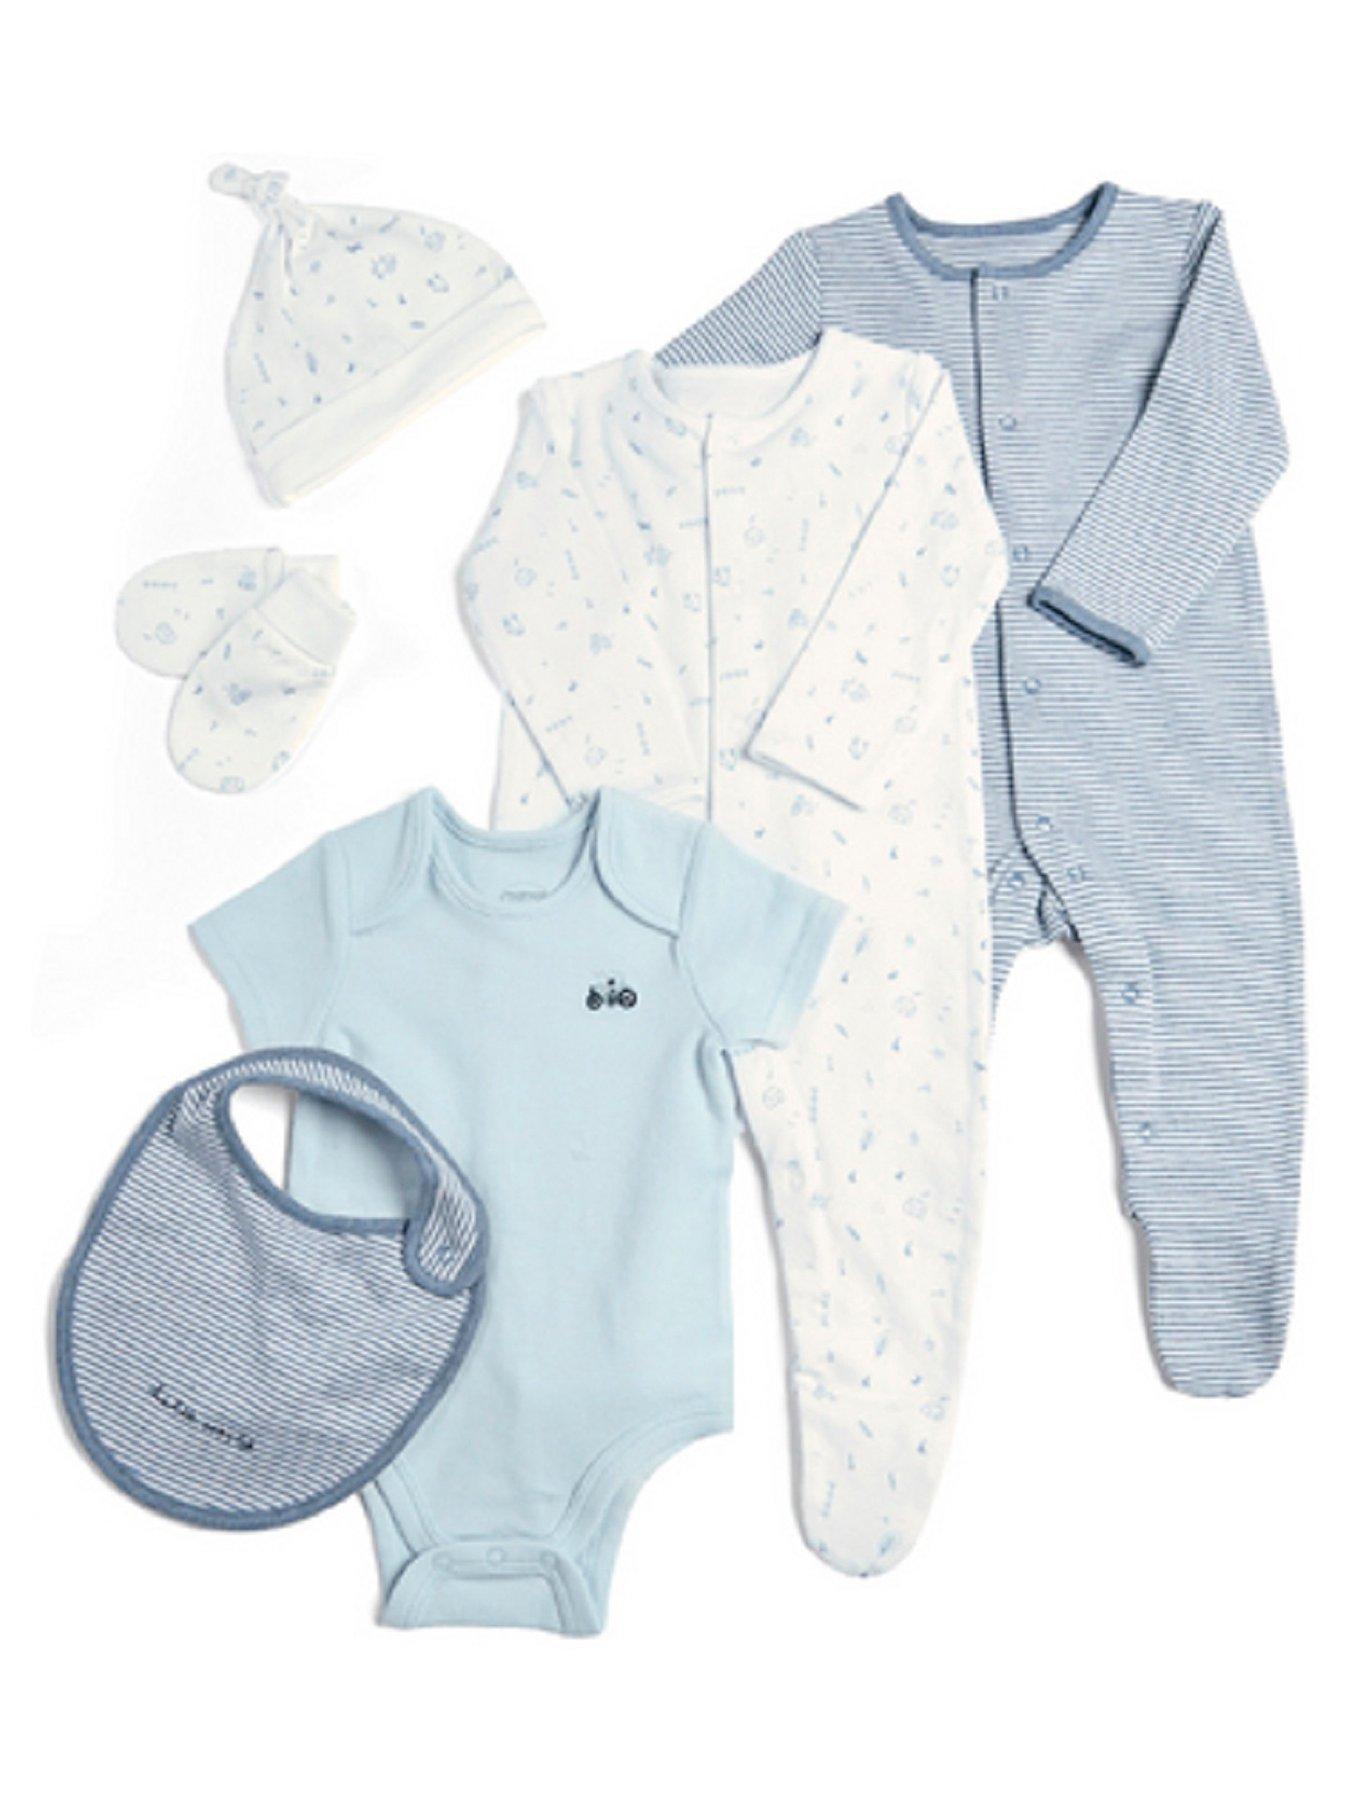 mamas and papas baby clothes sale